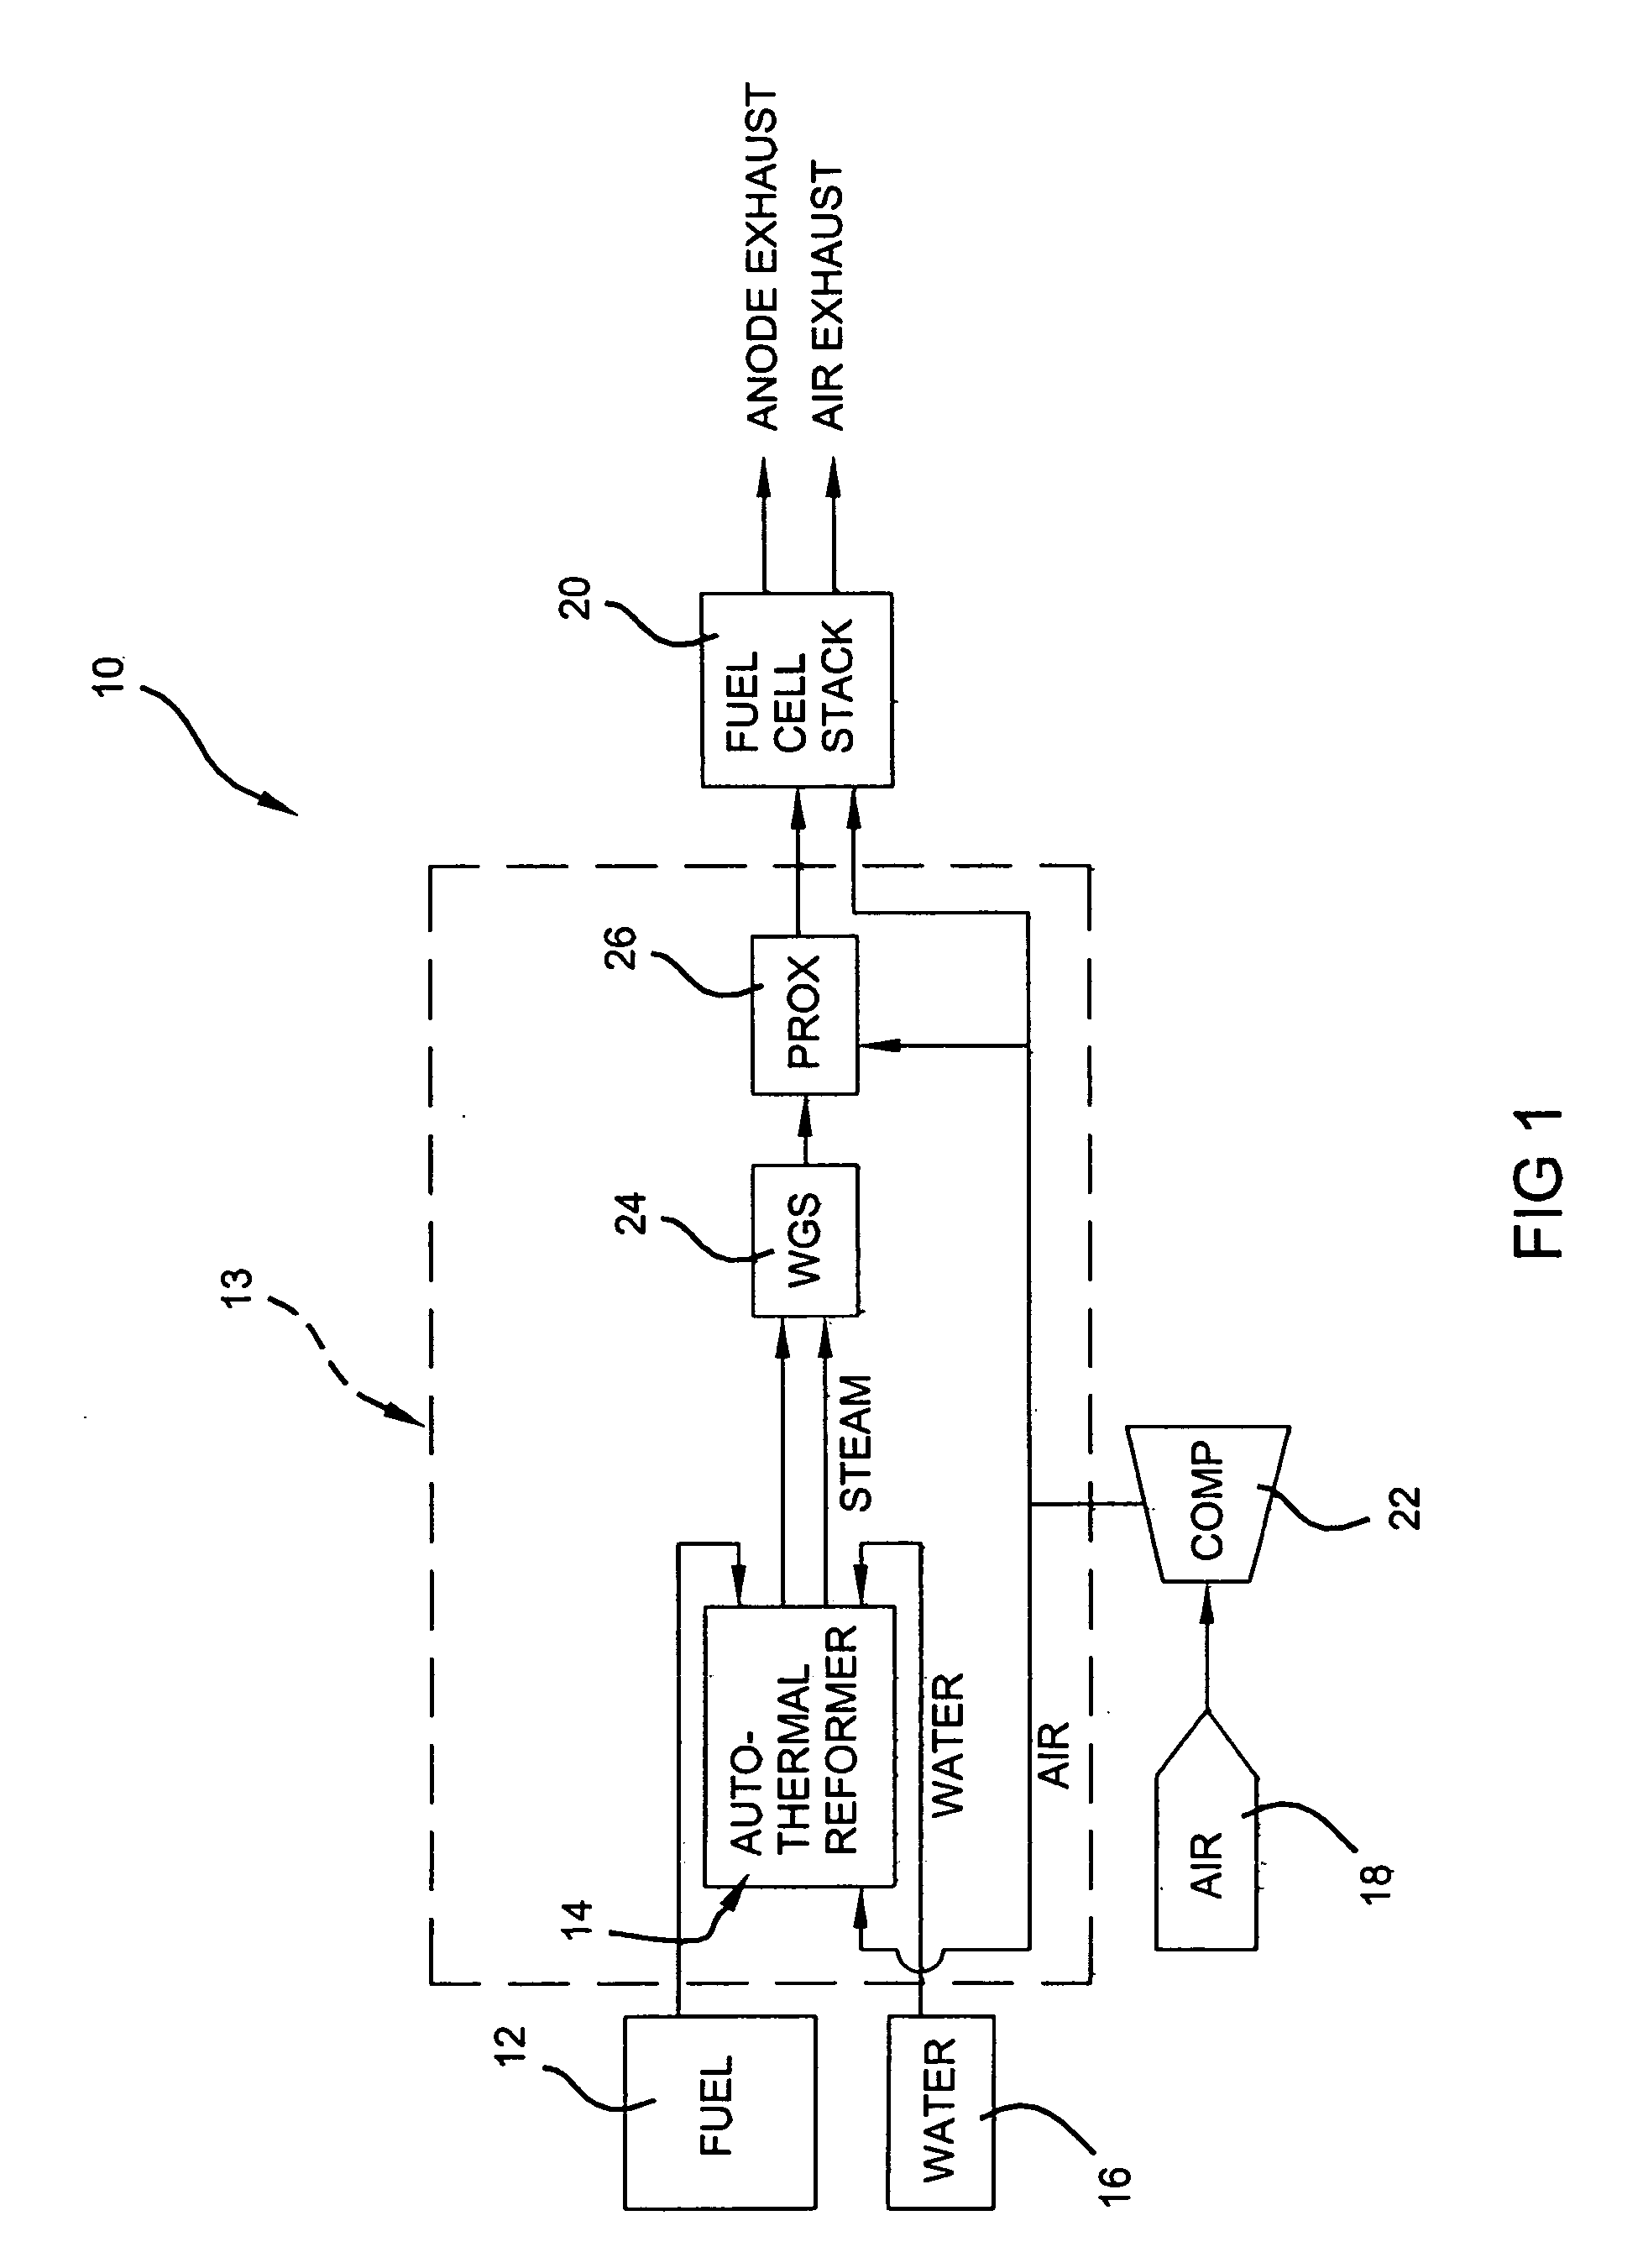 Rapid activation catalyst systemin a non-thermal plasma catalytic reactor